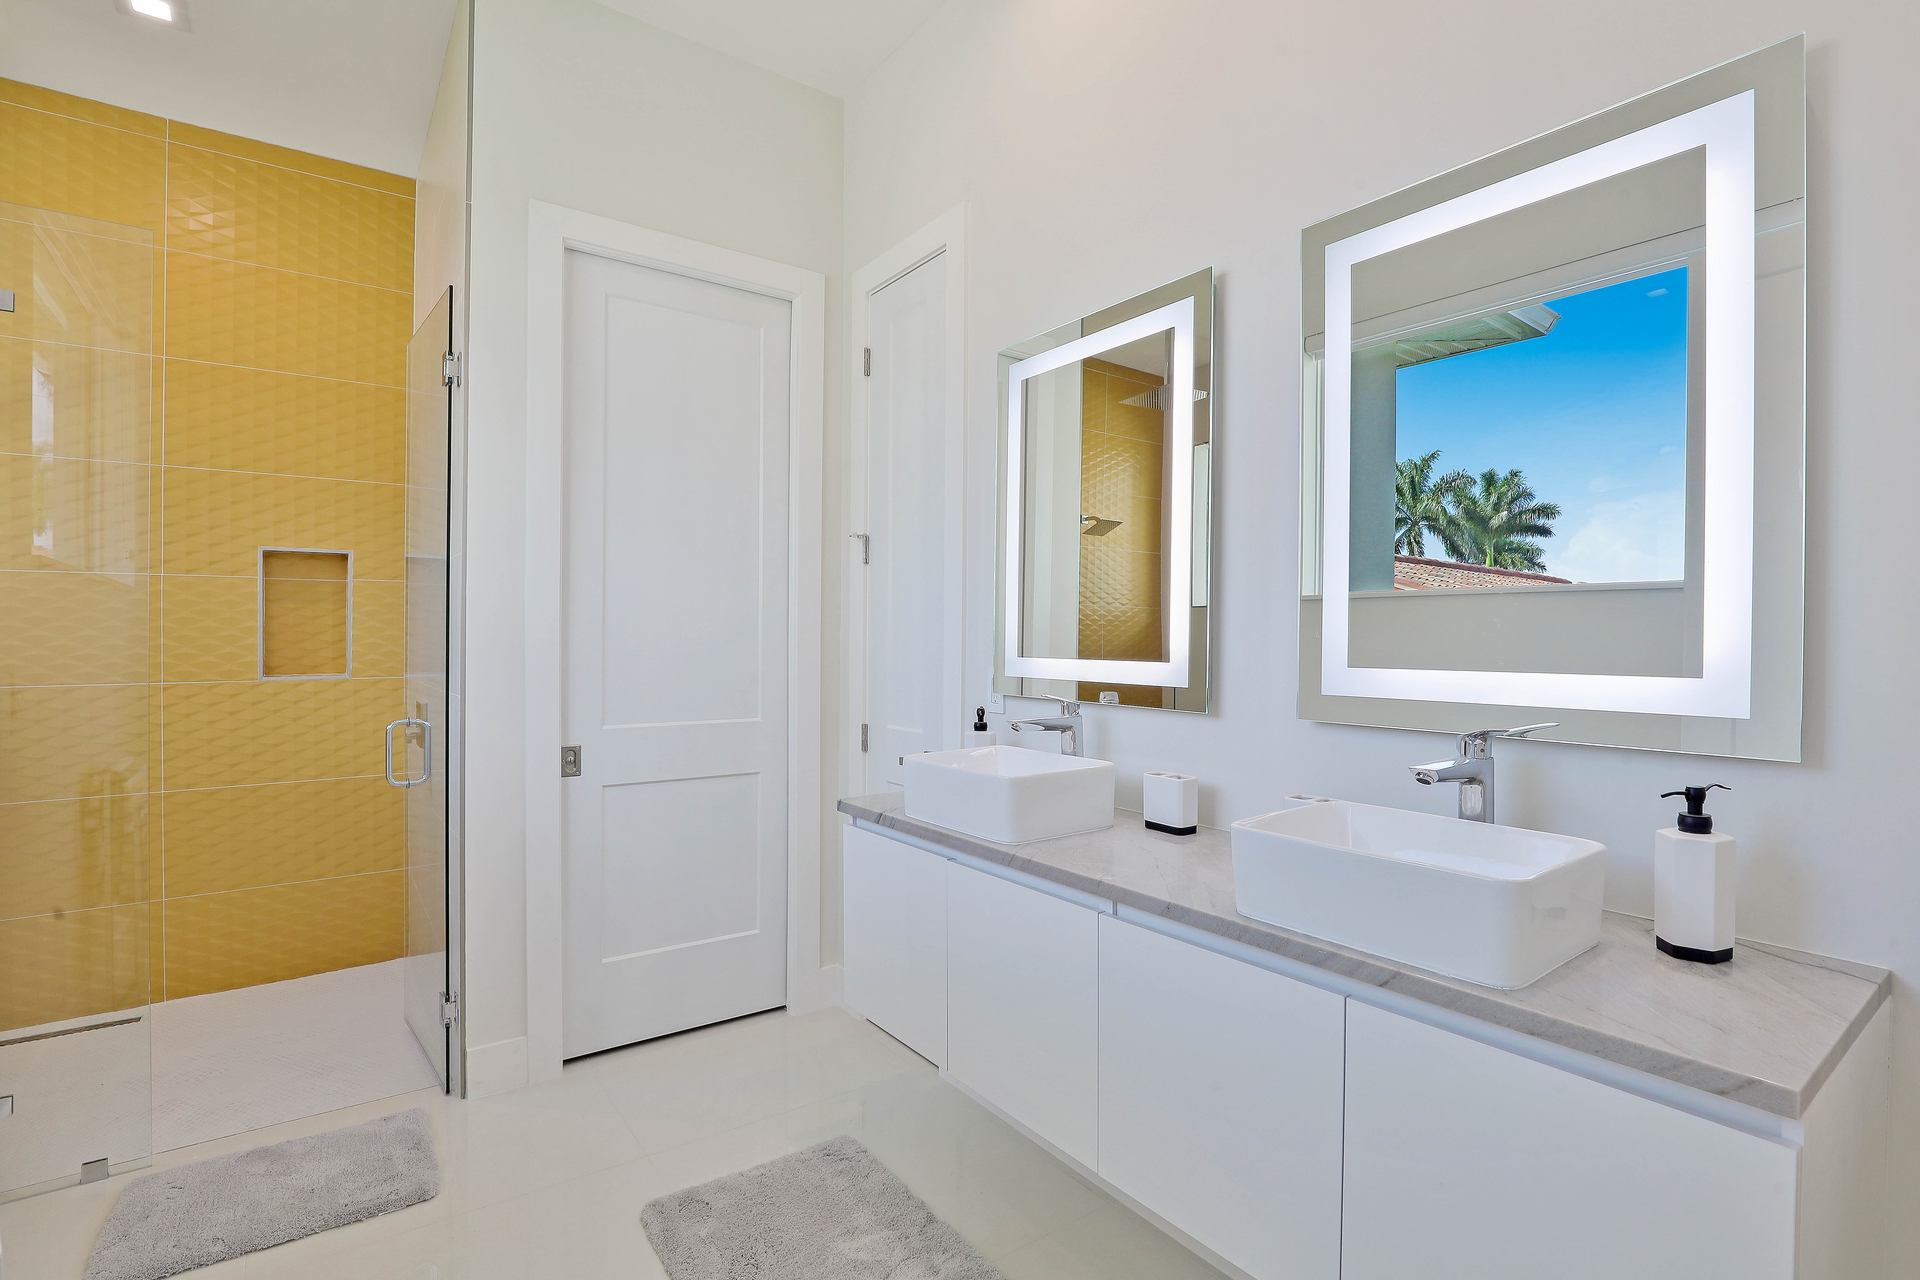 Bedrooms and Bathrooms in Cape Coral